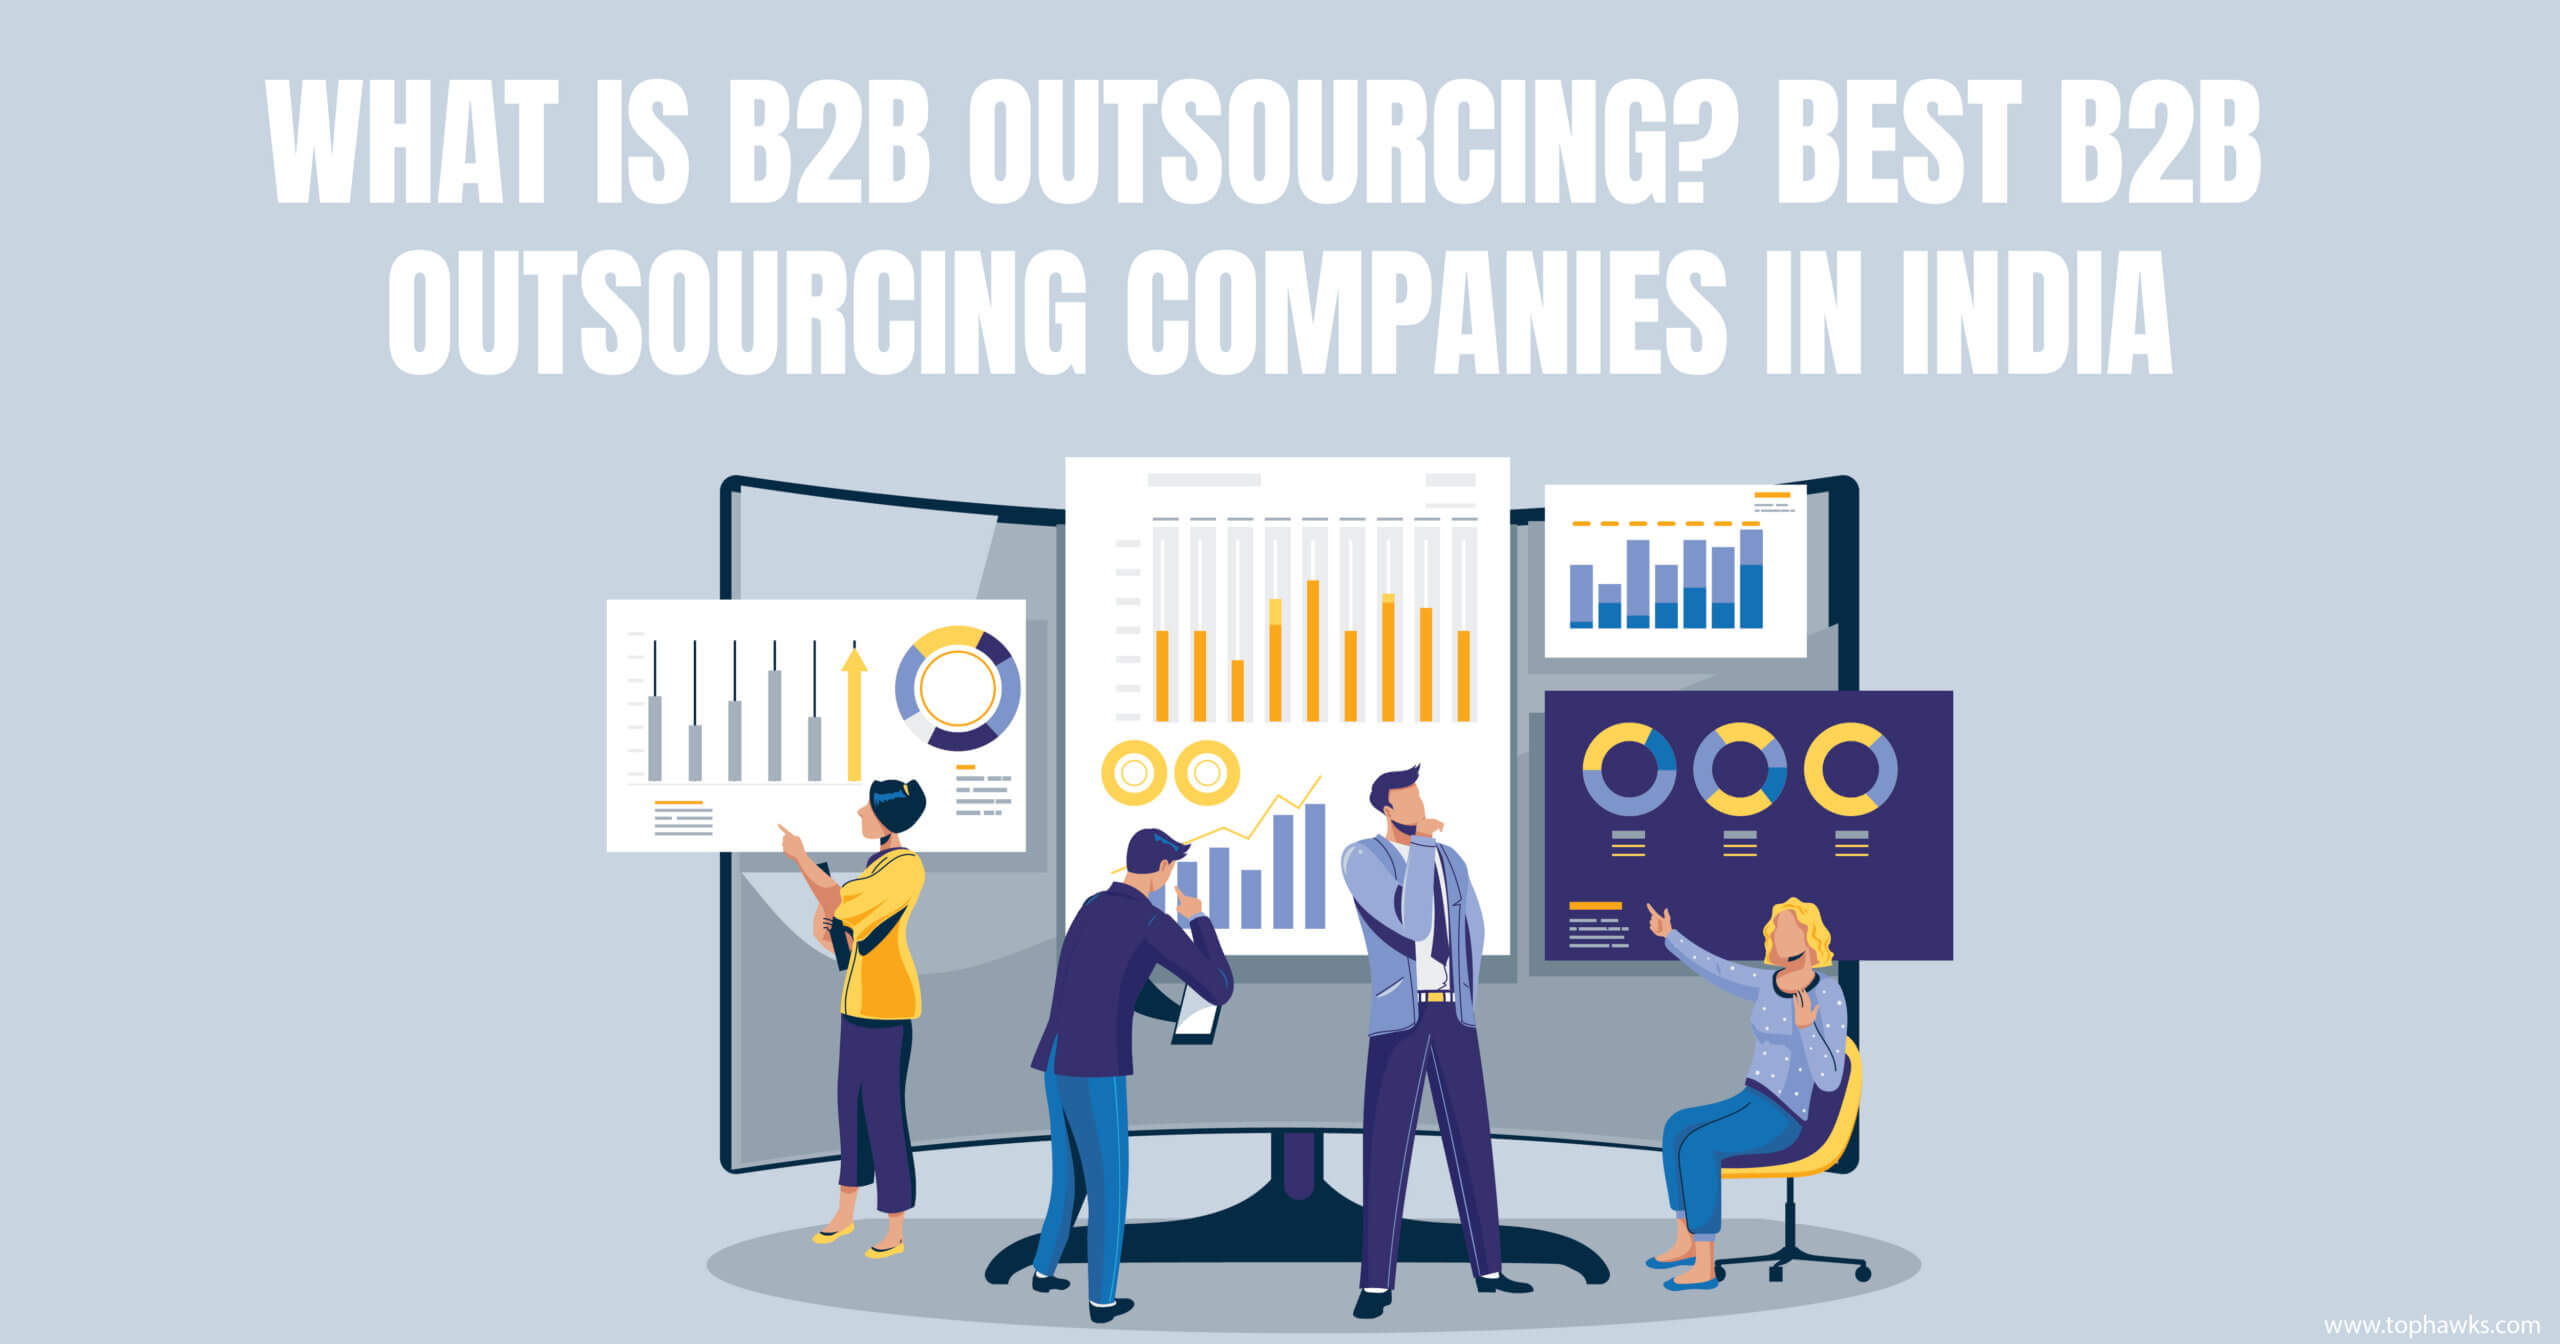 What is B2b outsourcing? Best b2b outsourcing companies in India.